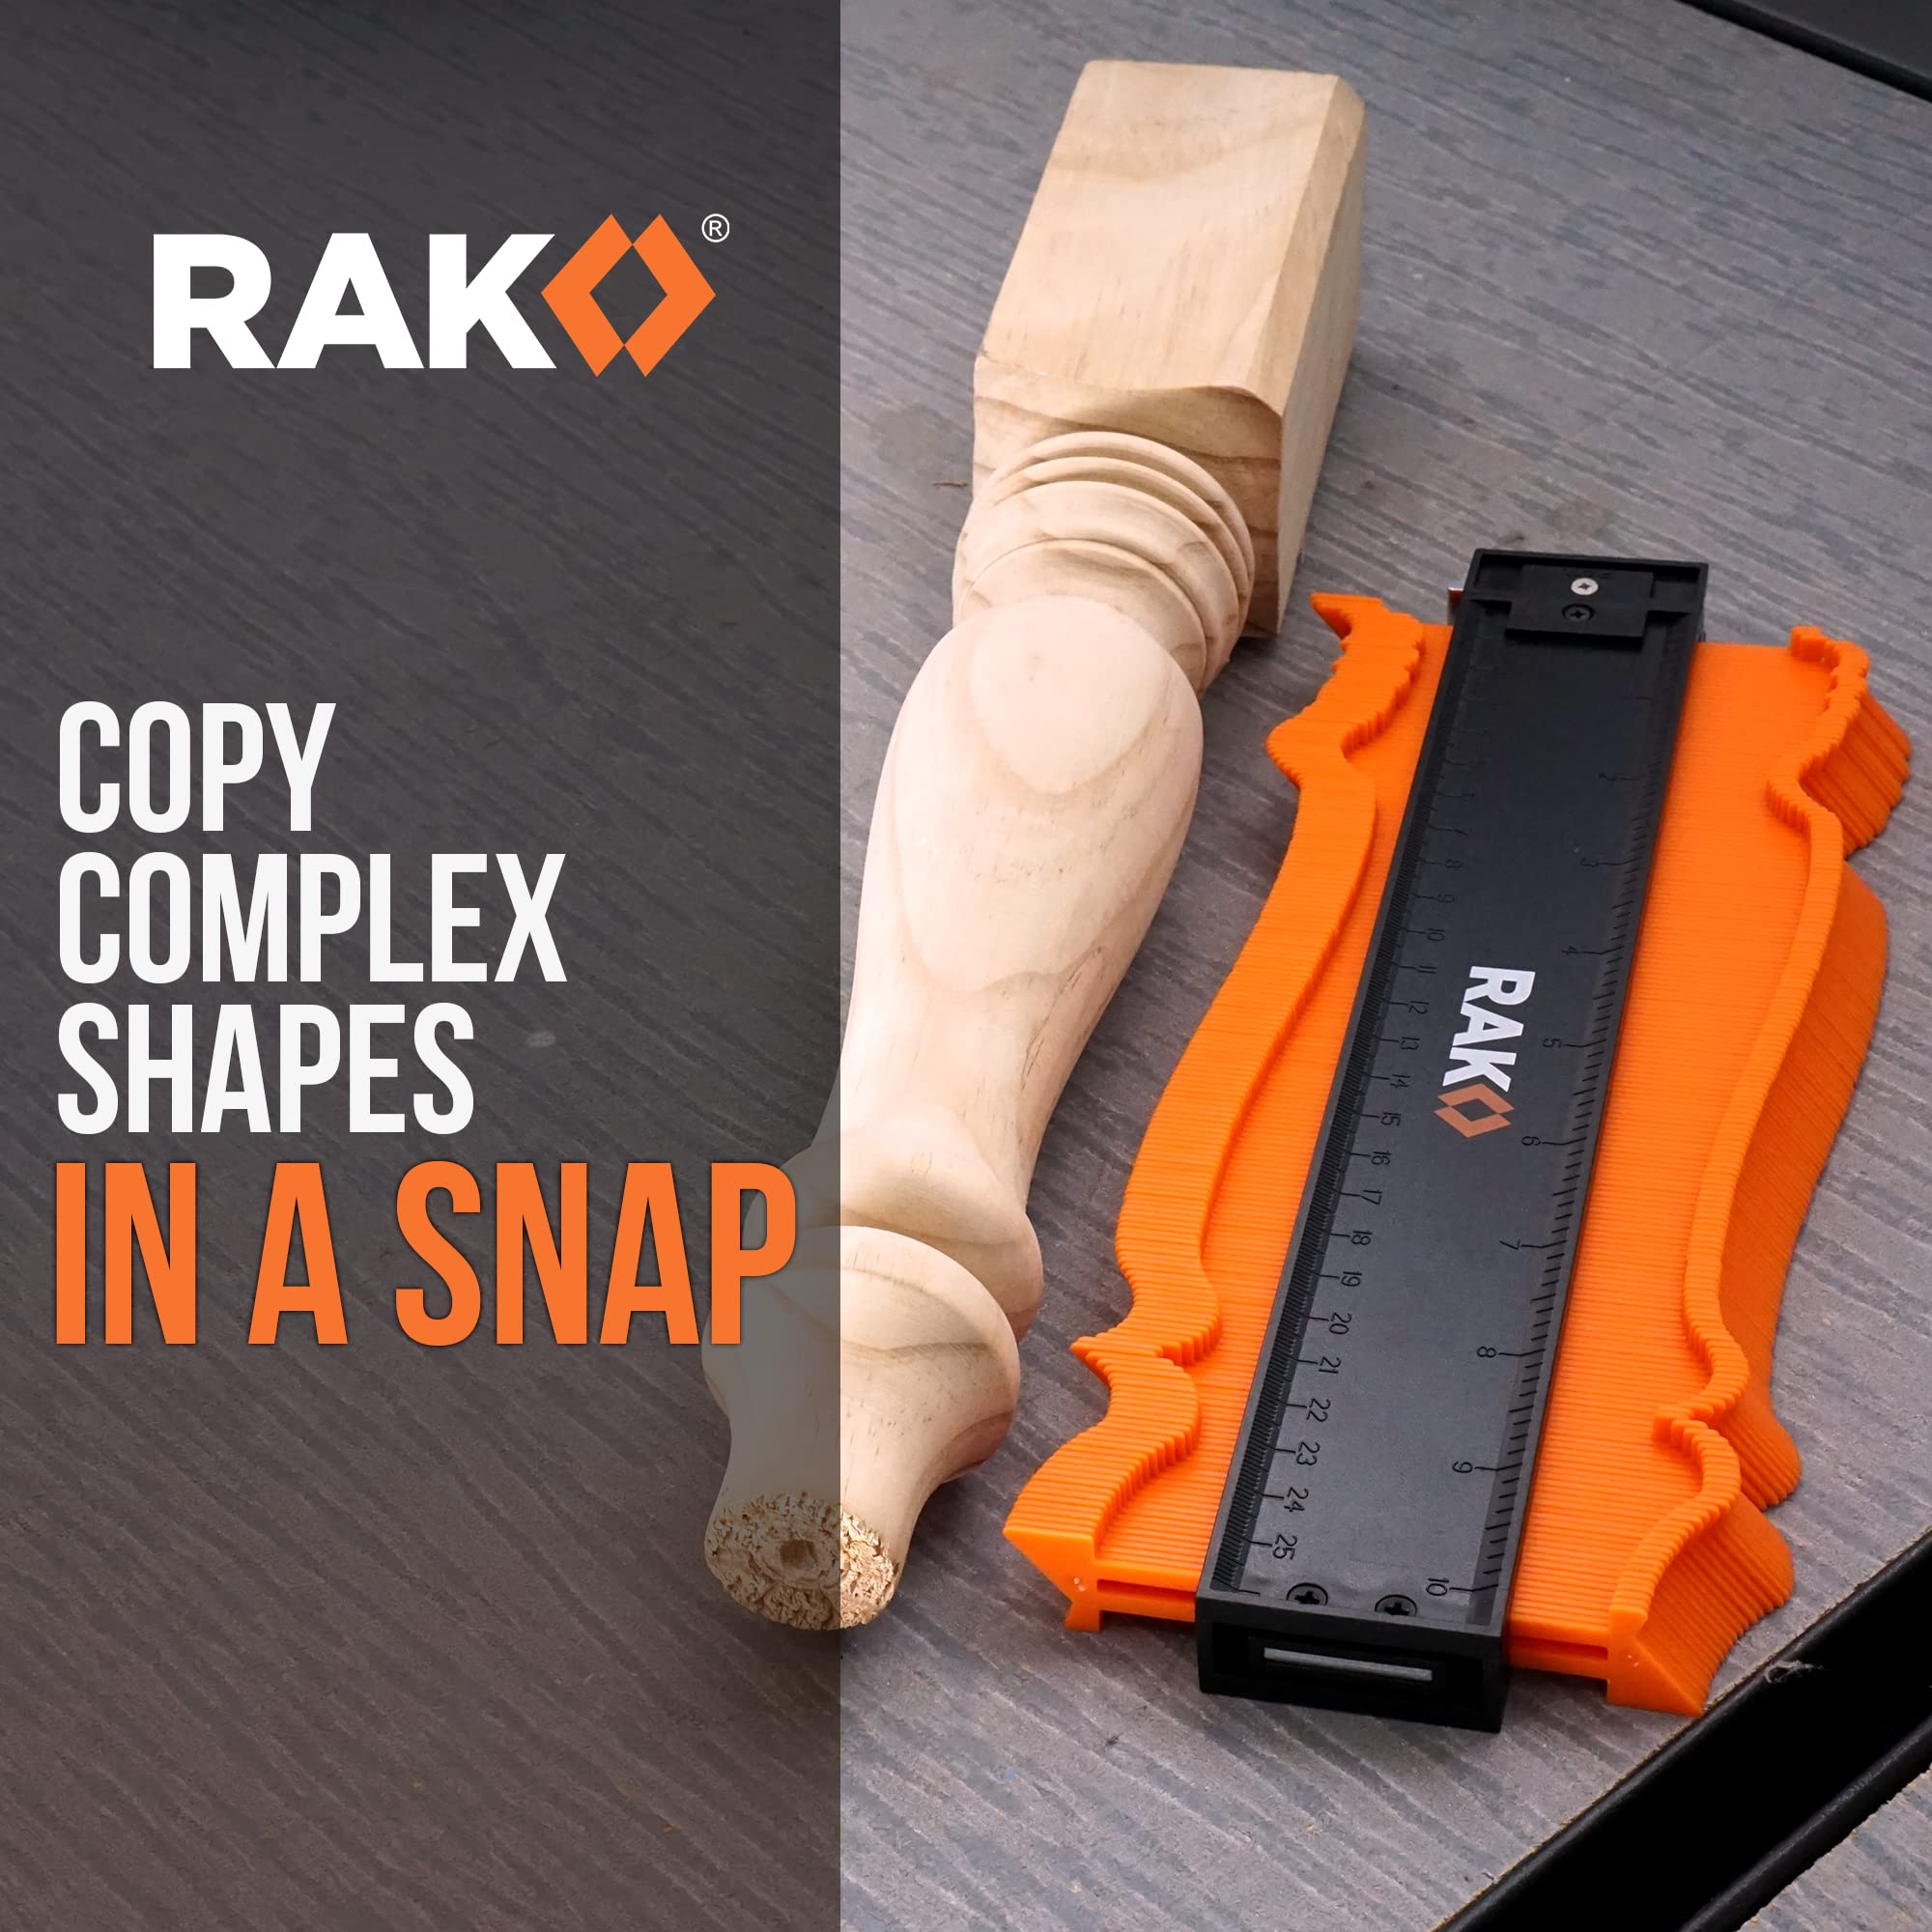 RAK Contour Gauge - Christmas Gifts for Dad - 10 Inch Edge Profile Measuring Tool with Lock - Adjustable Irregular Shape Outline of Flooring, Laying Tile, Woodwork, Construction - Stocking Stuffers